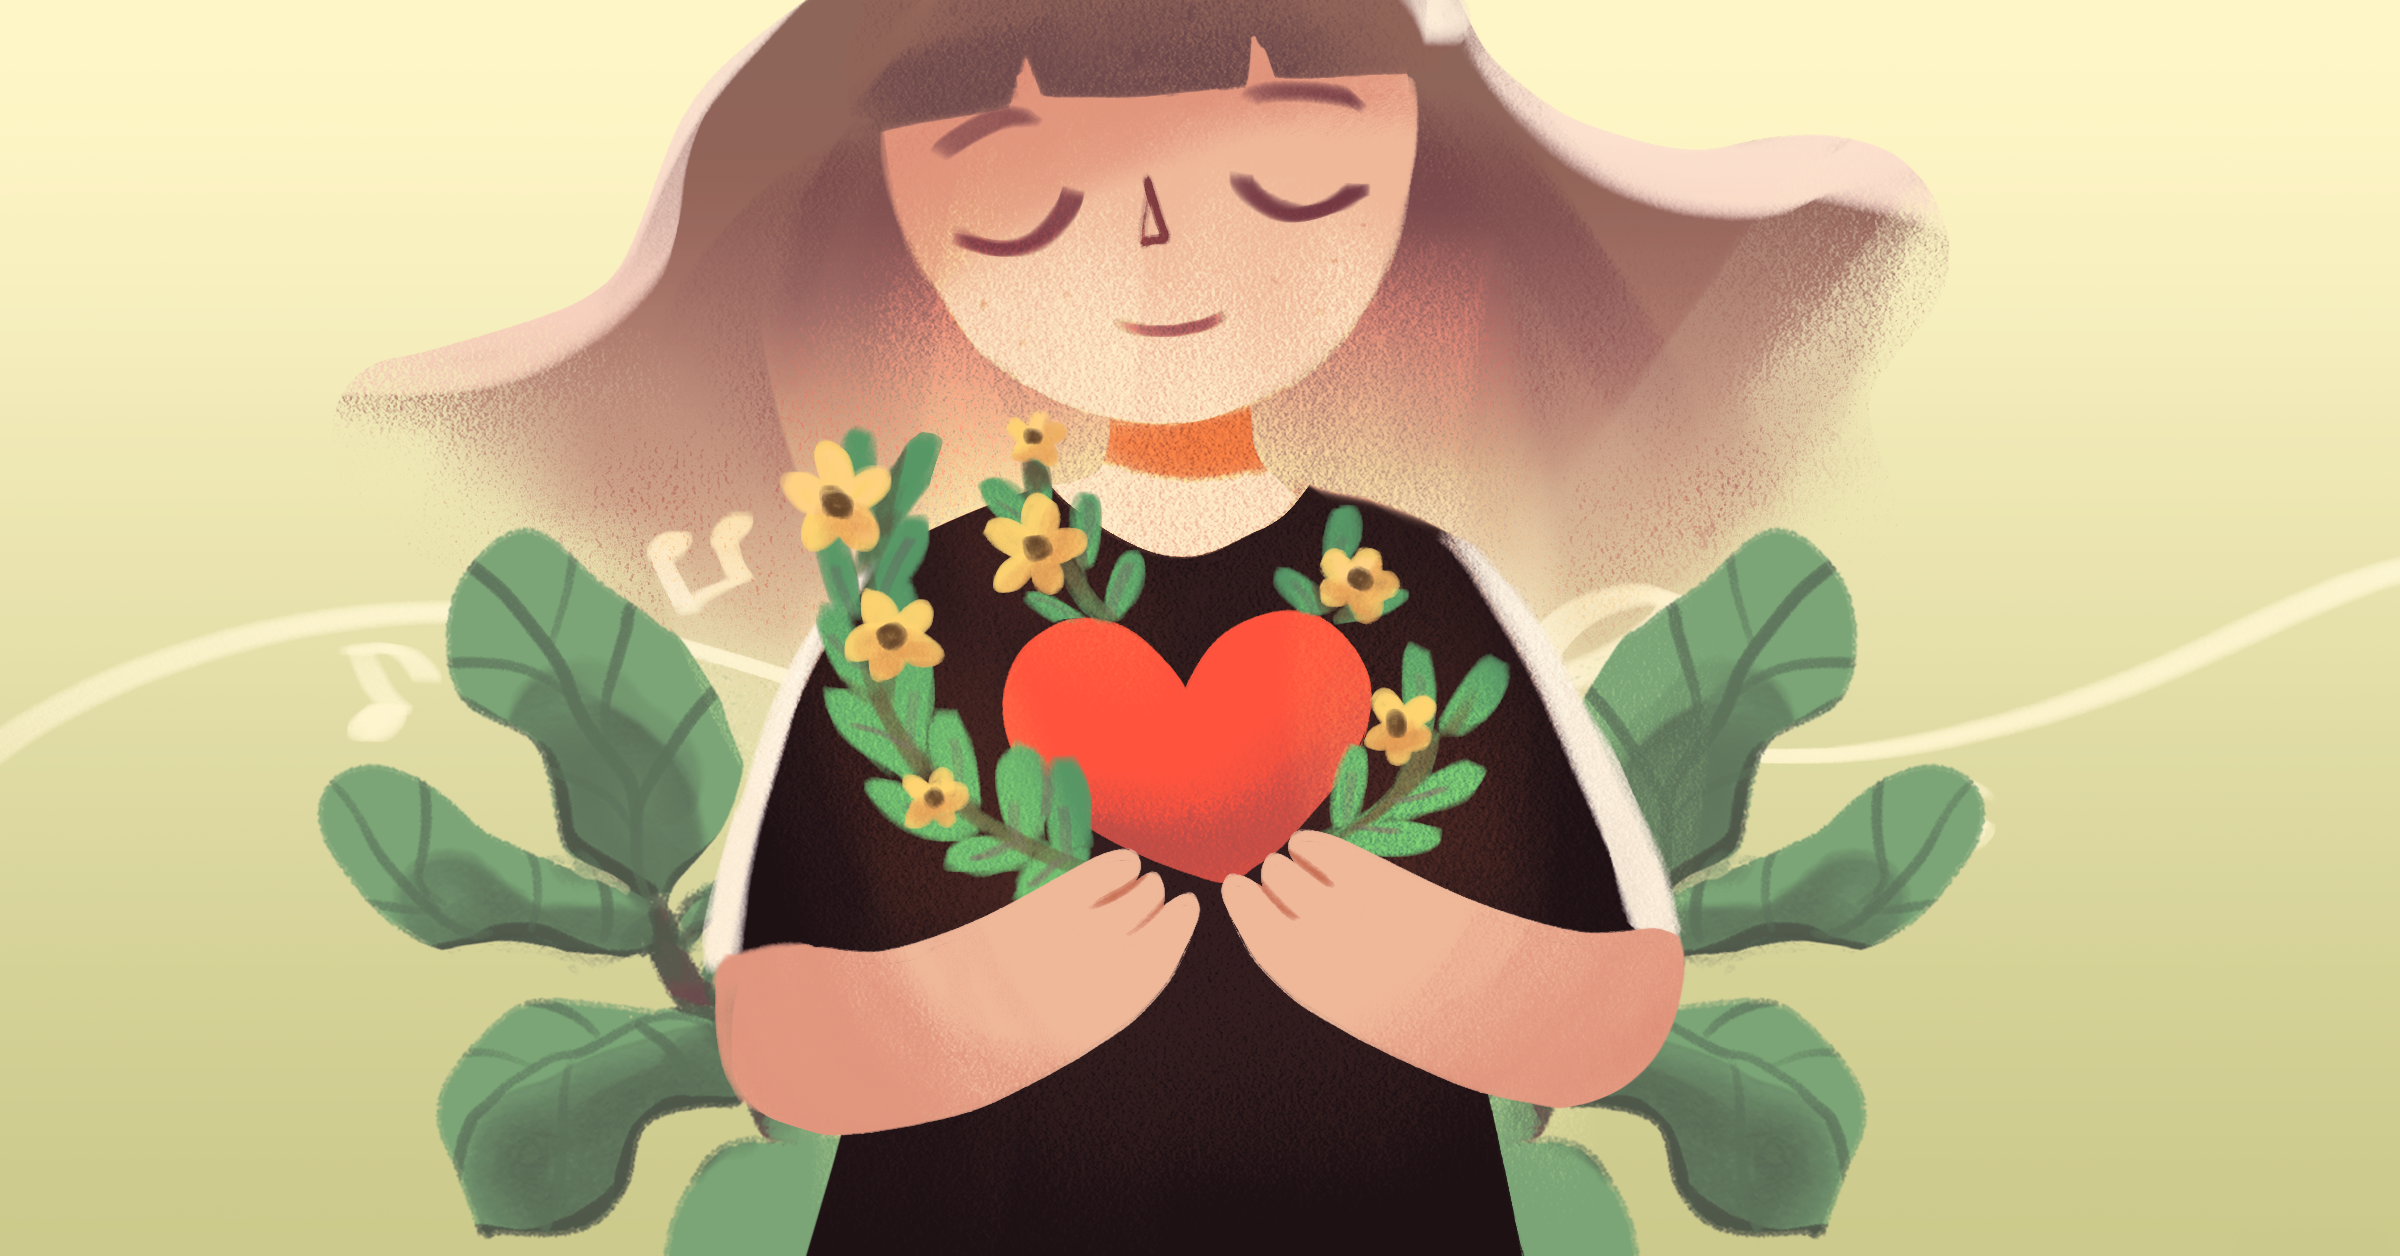 A girl stands in nature with a red heart in both hands and her eyes closed. ("Kinder World." Lumi Interactive. 2021.)